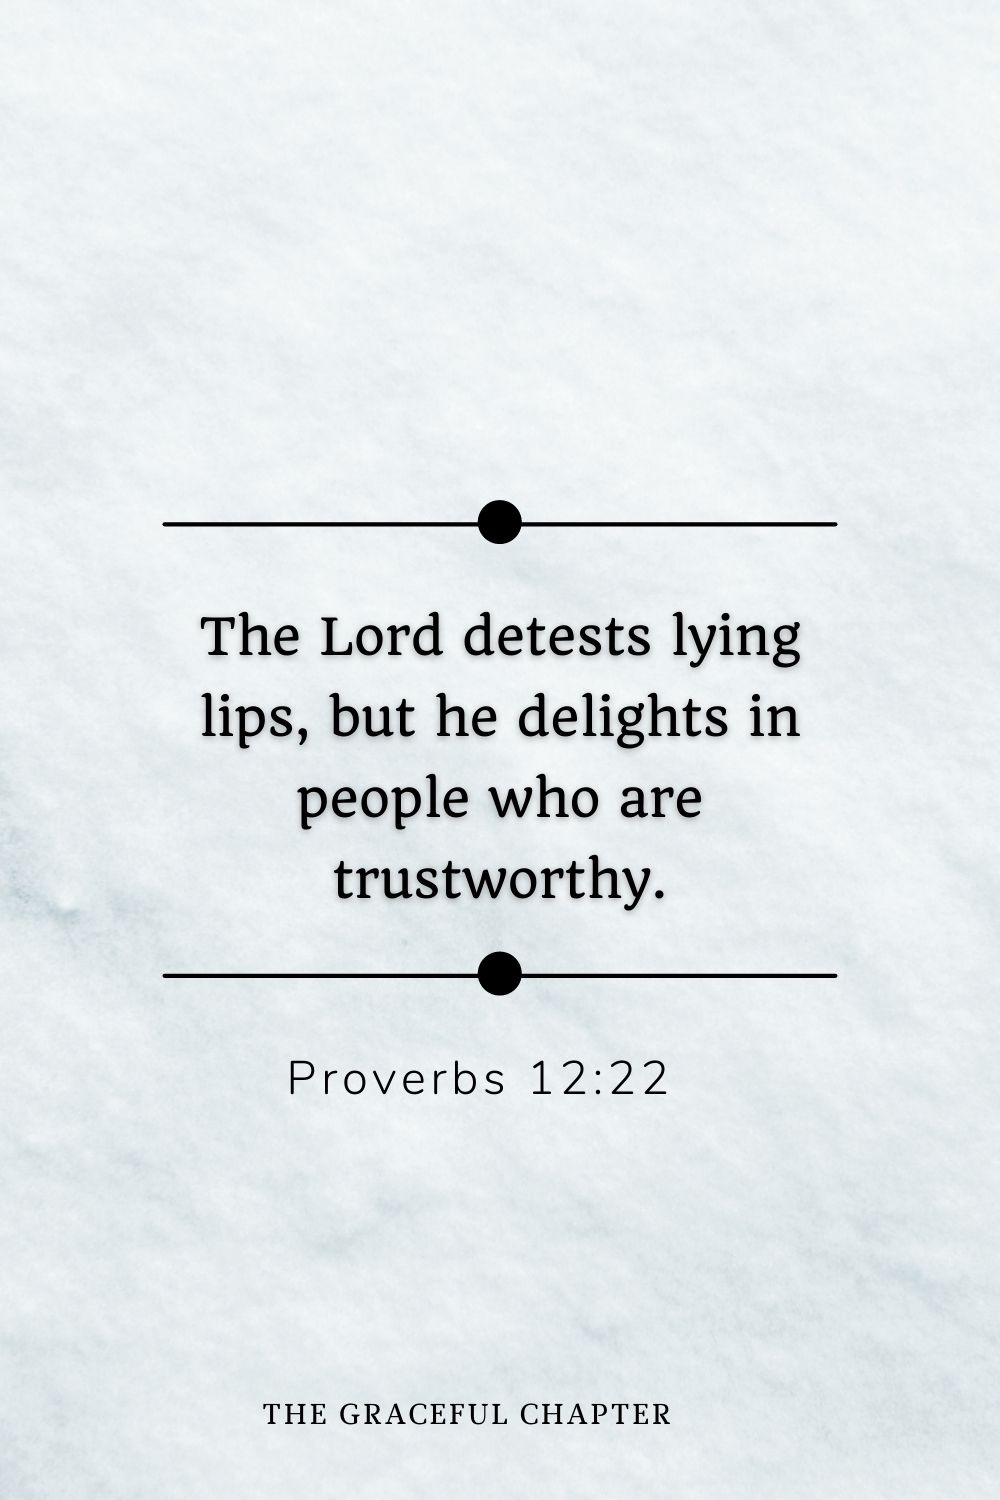 The Lord detests lying lips, but he delights in people who are trustworthy. Proverbs 12:22